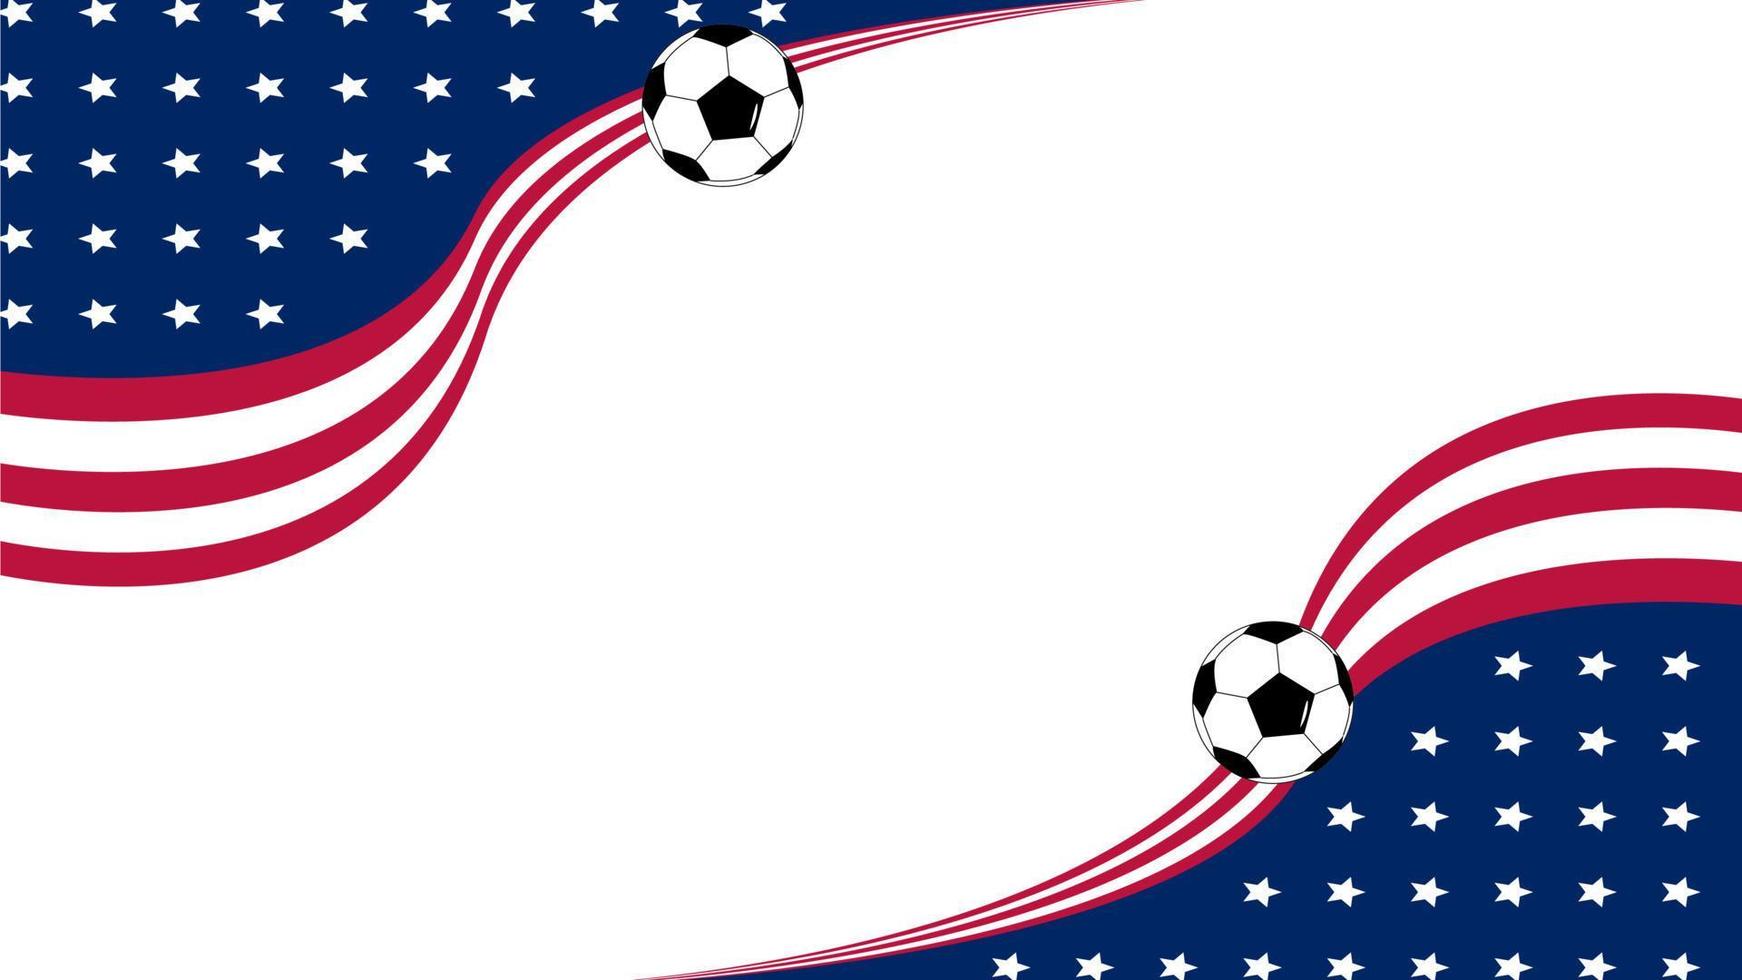 Football background on the theme of USA flag with white background vector illustration